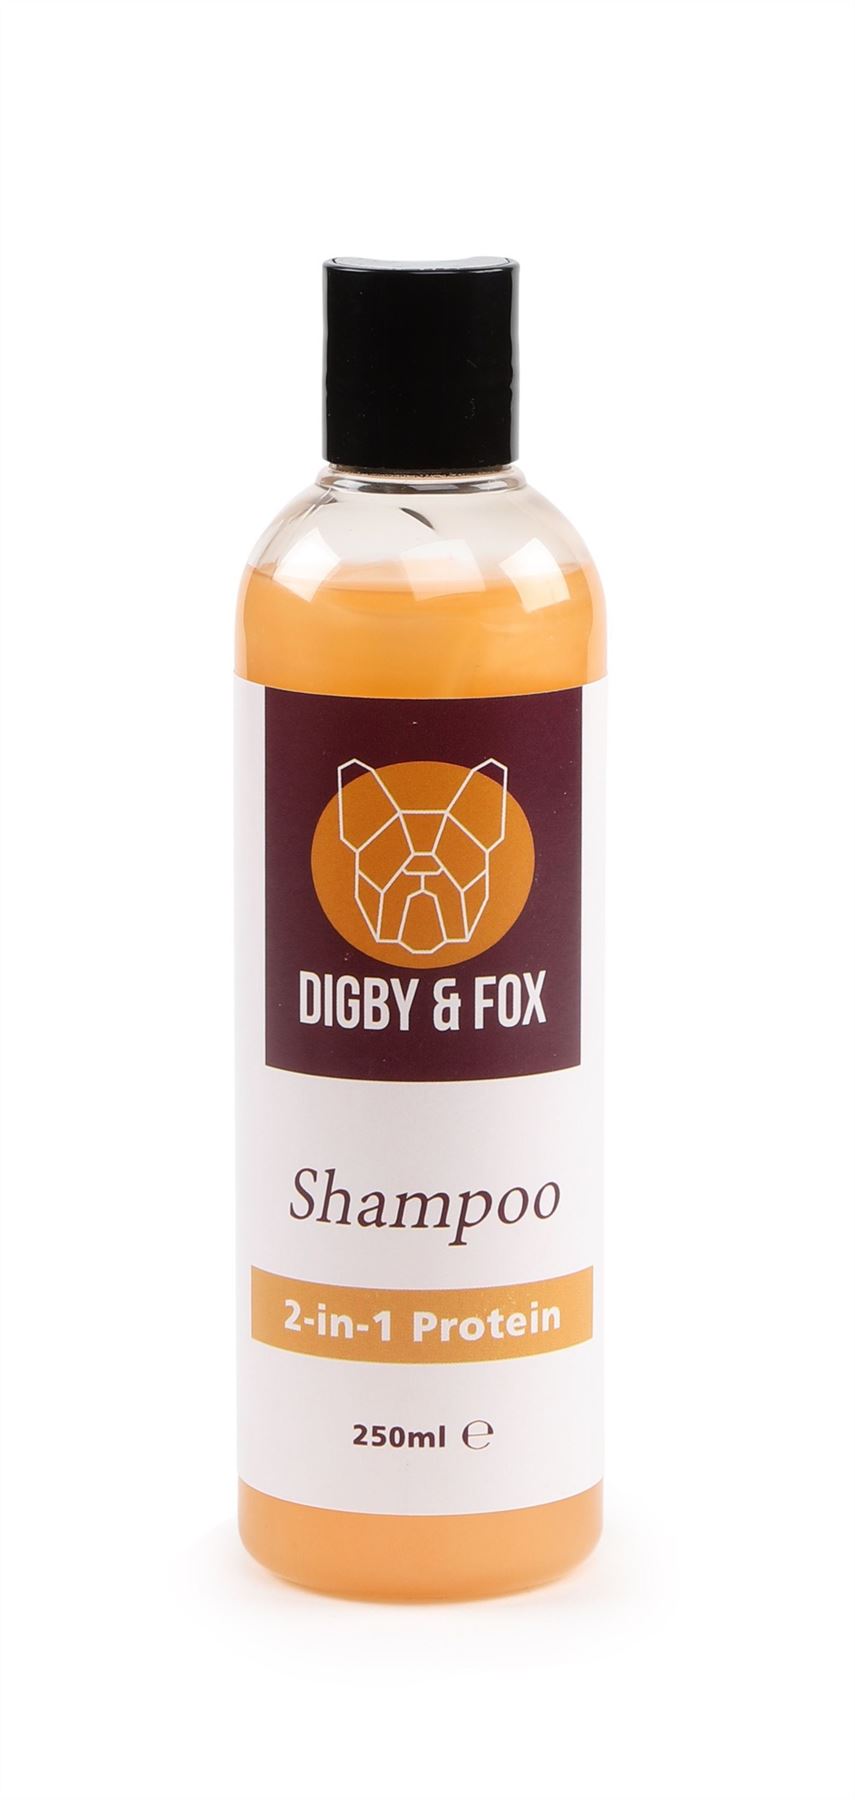 Shires Digby & Fox Protein Shampoo & Conditioner - Just Horse Riders